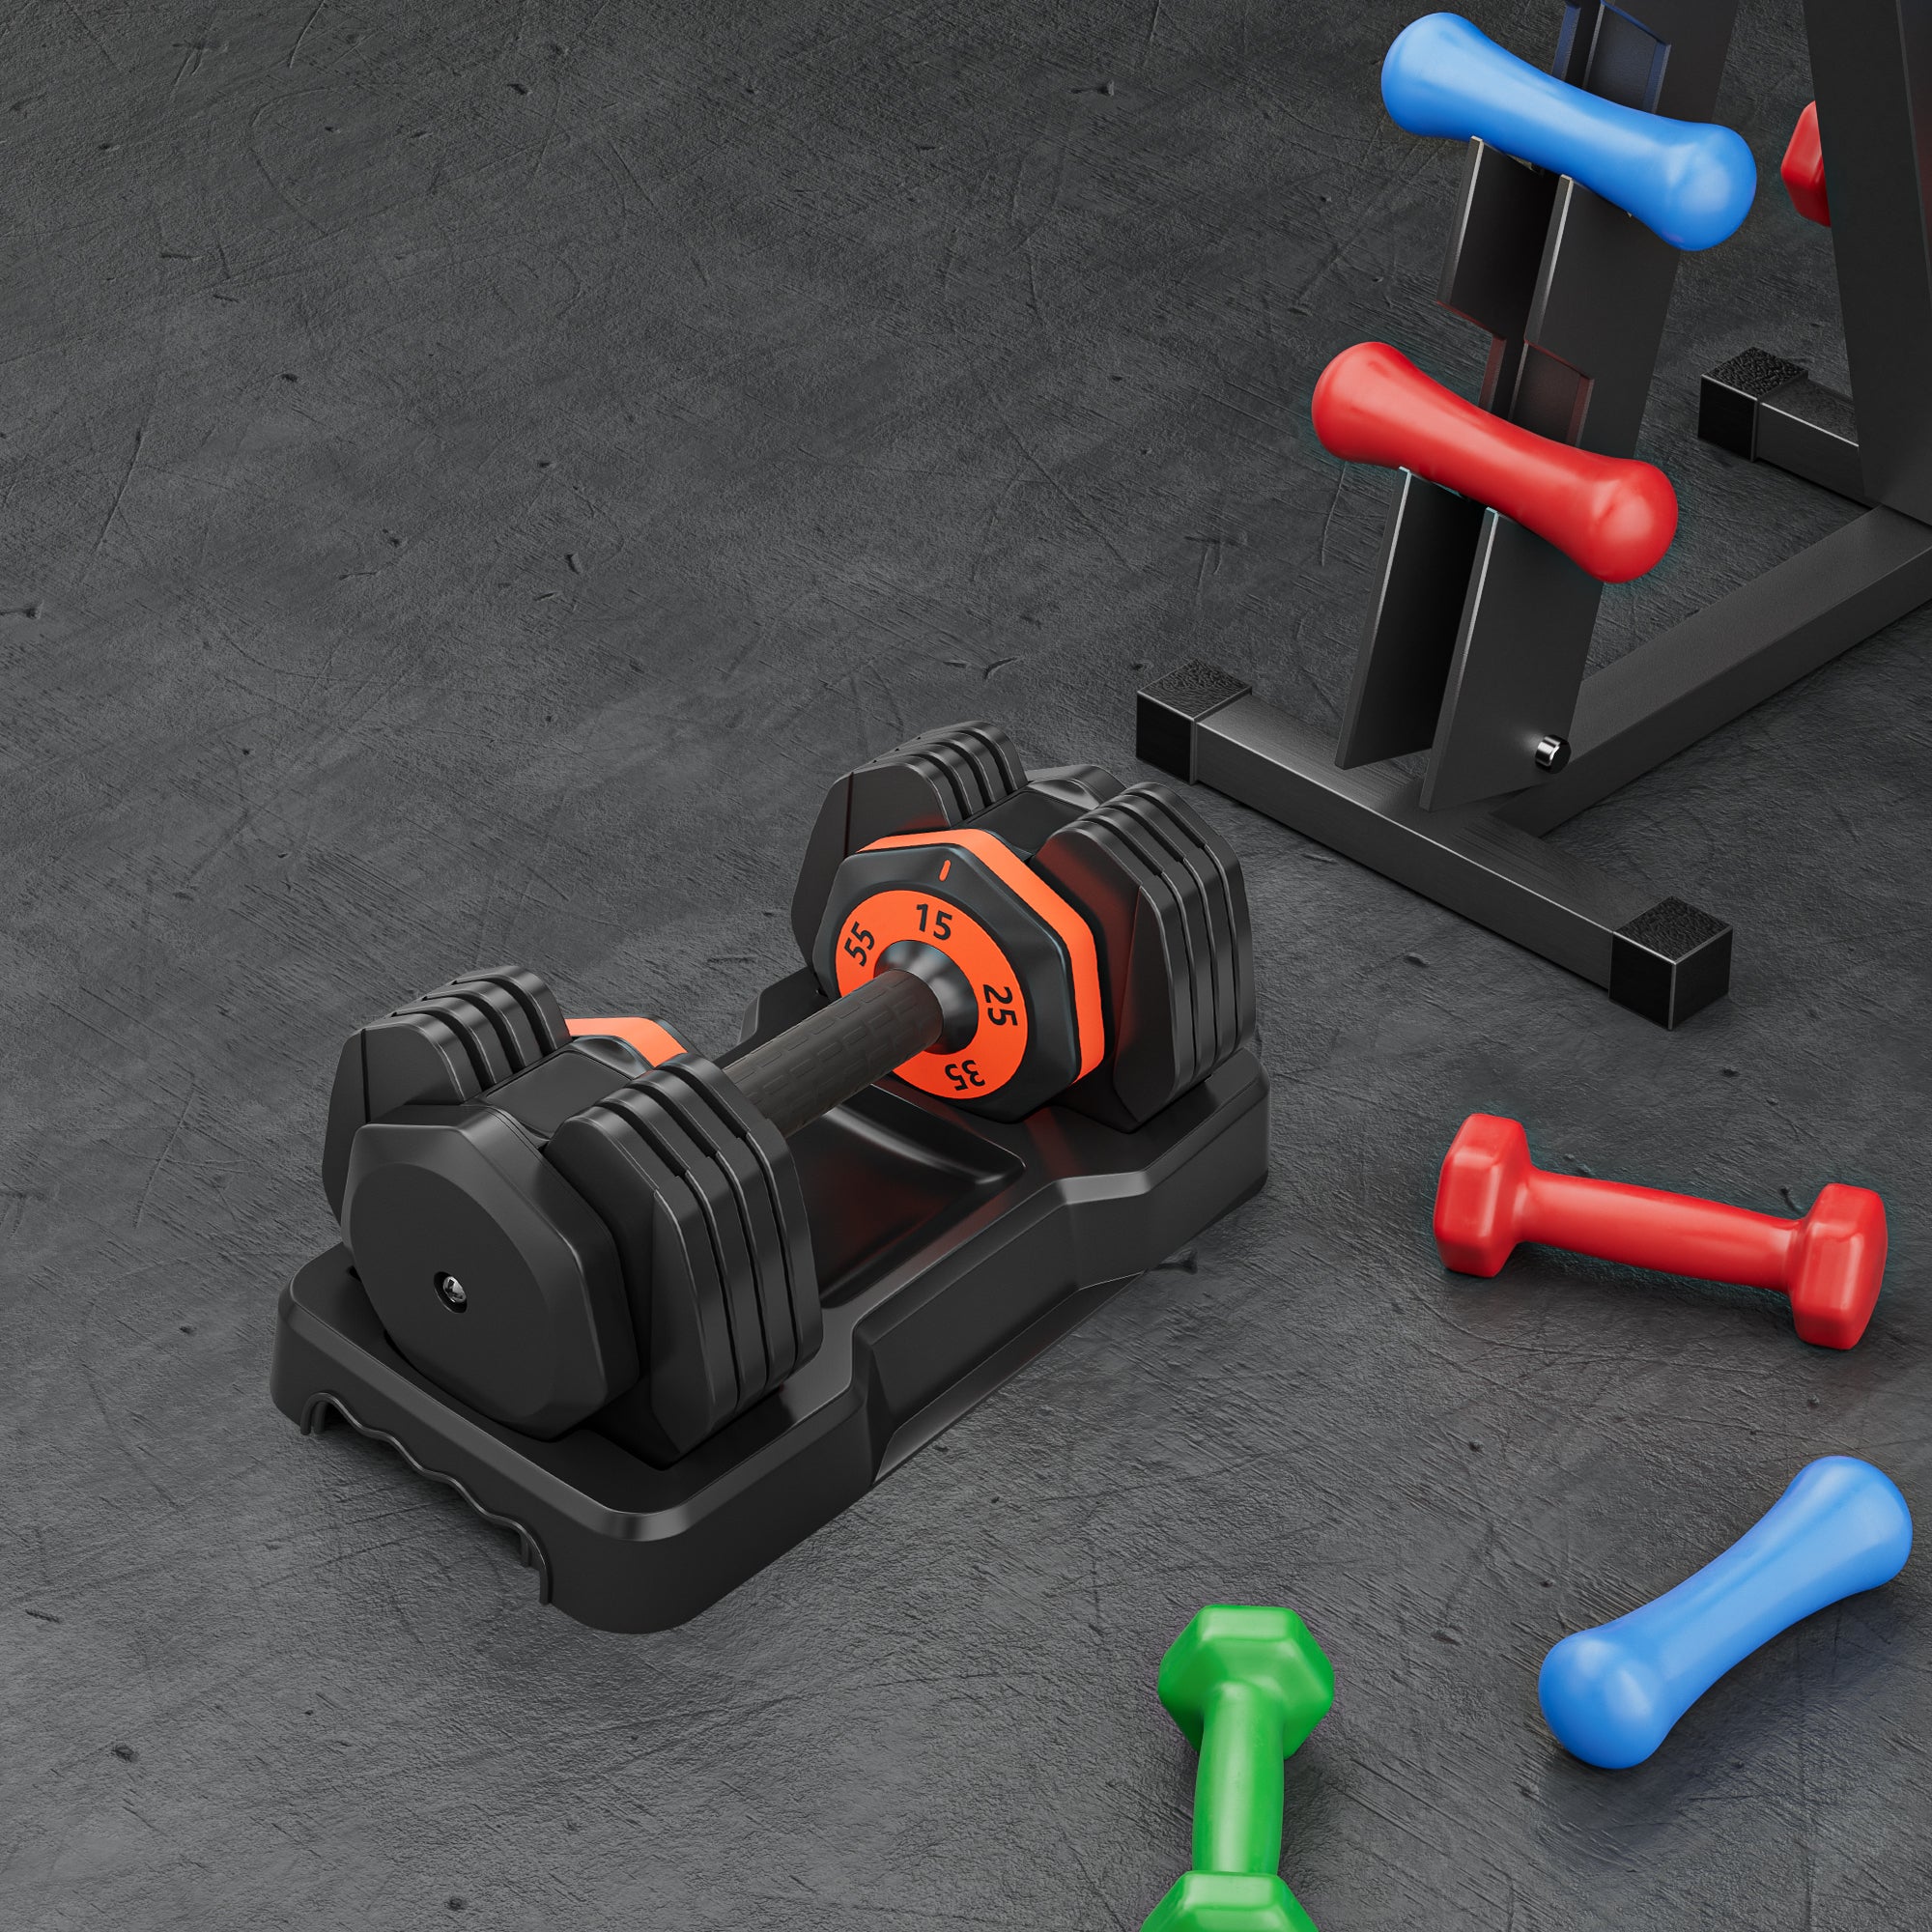 55lbs 5 in 1 Single Adjustable Dumbbell Free Weight with Anti-Slip Metal Handle